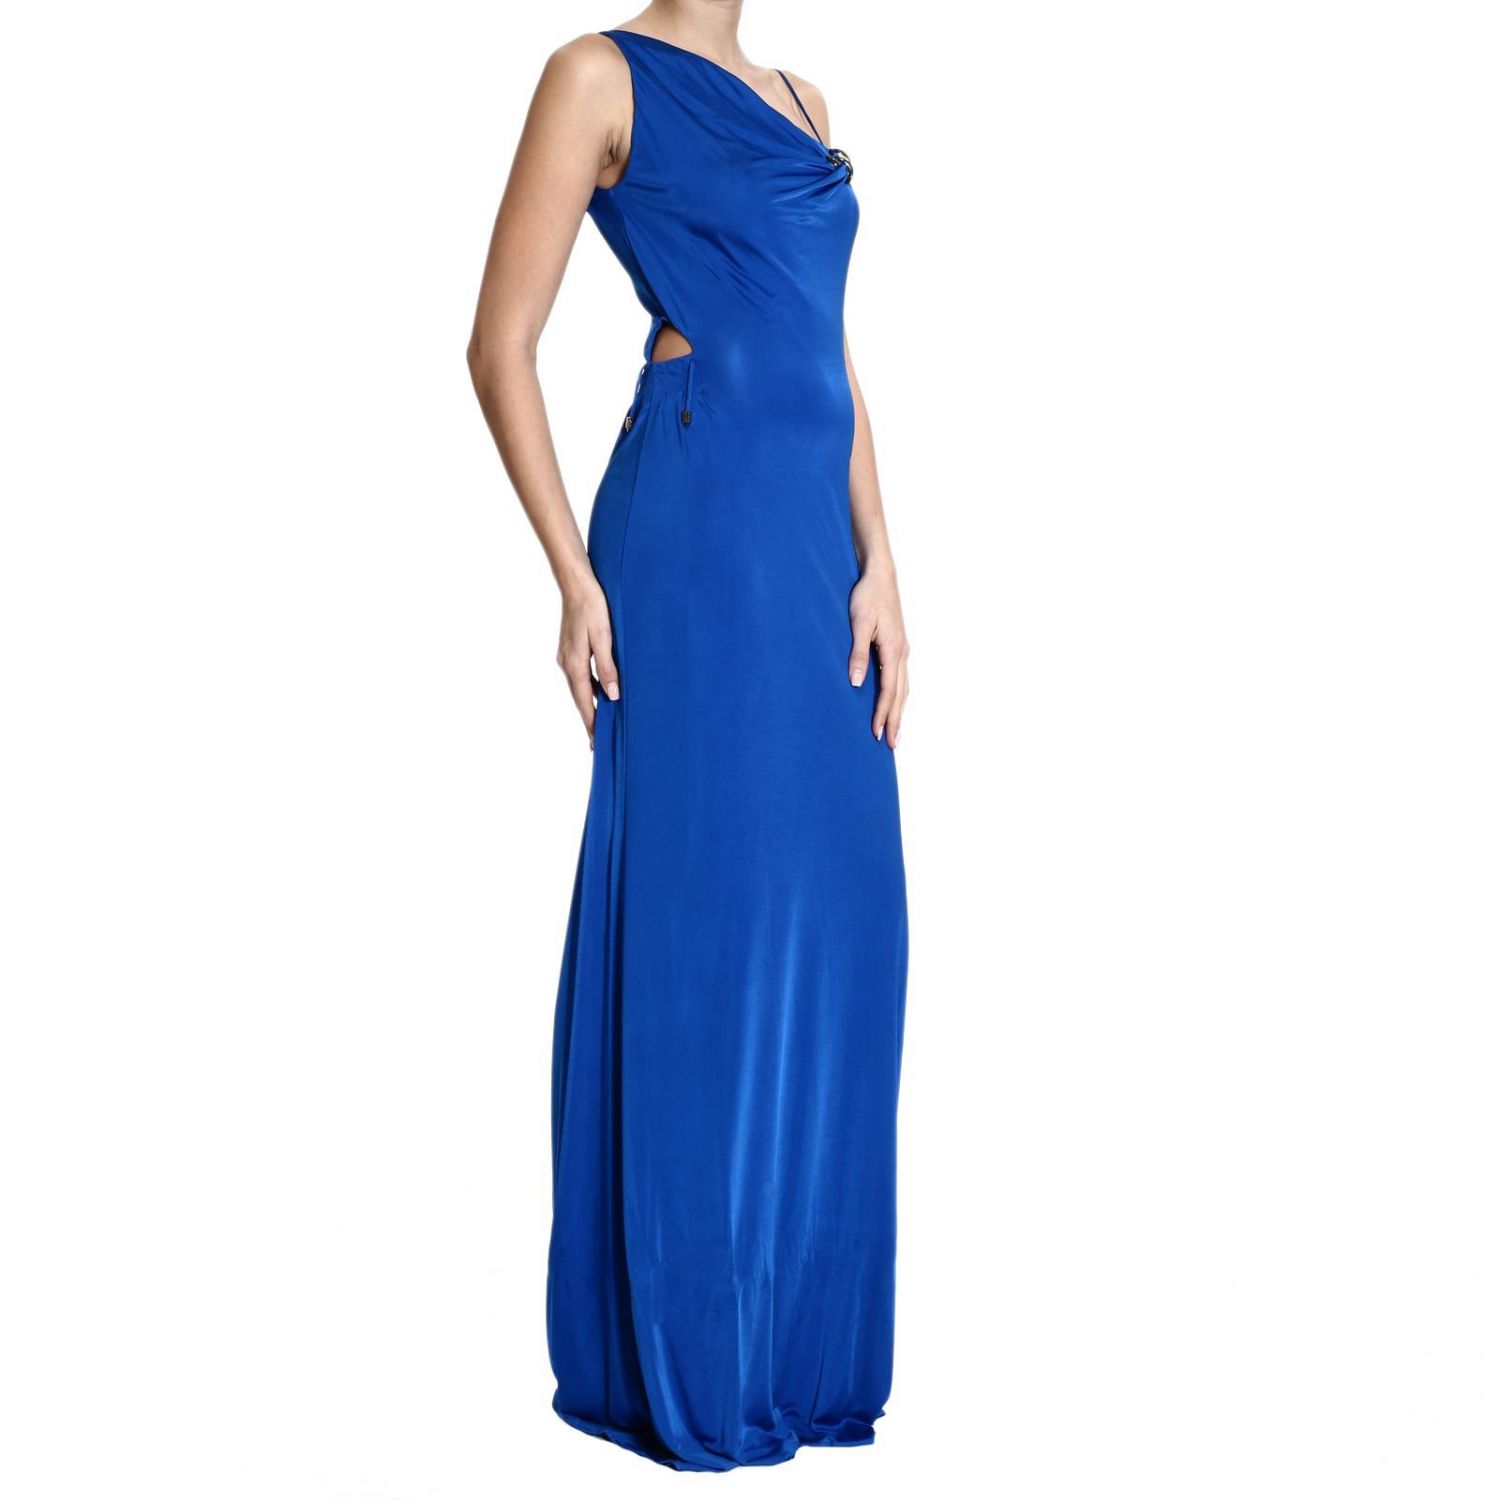 Roberto Cavalli Outlet: ONE-SHOULDER JERSEY WITH SPILLA | Dress Roberto ...